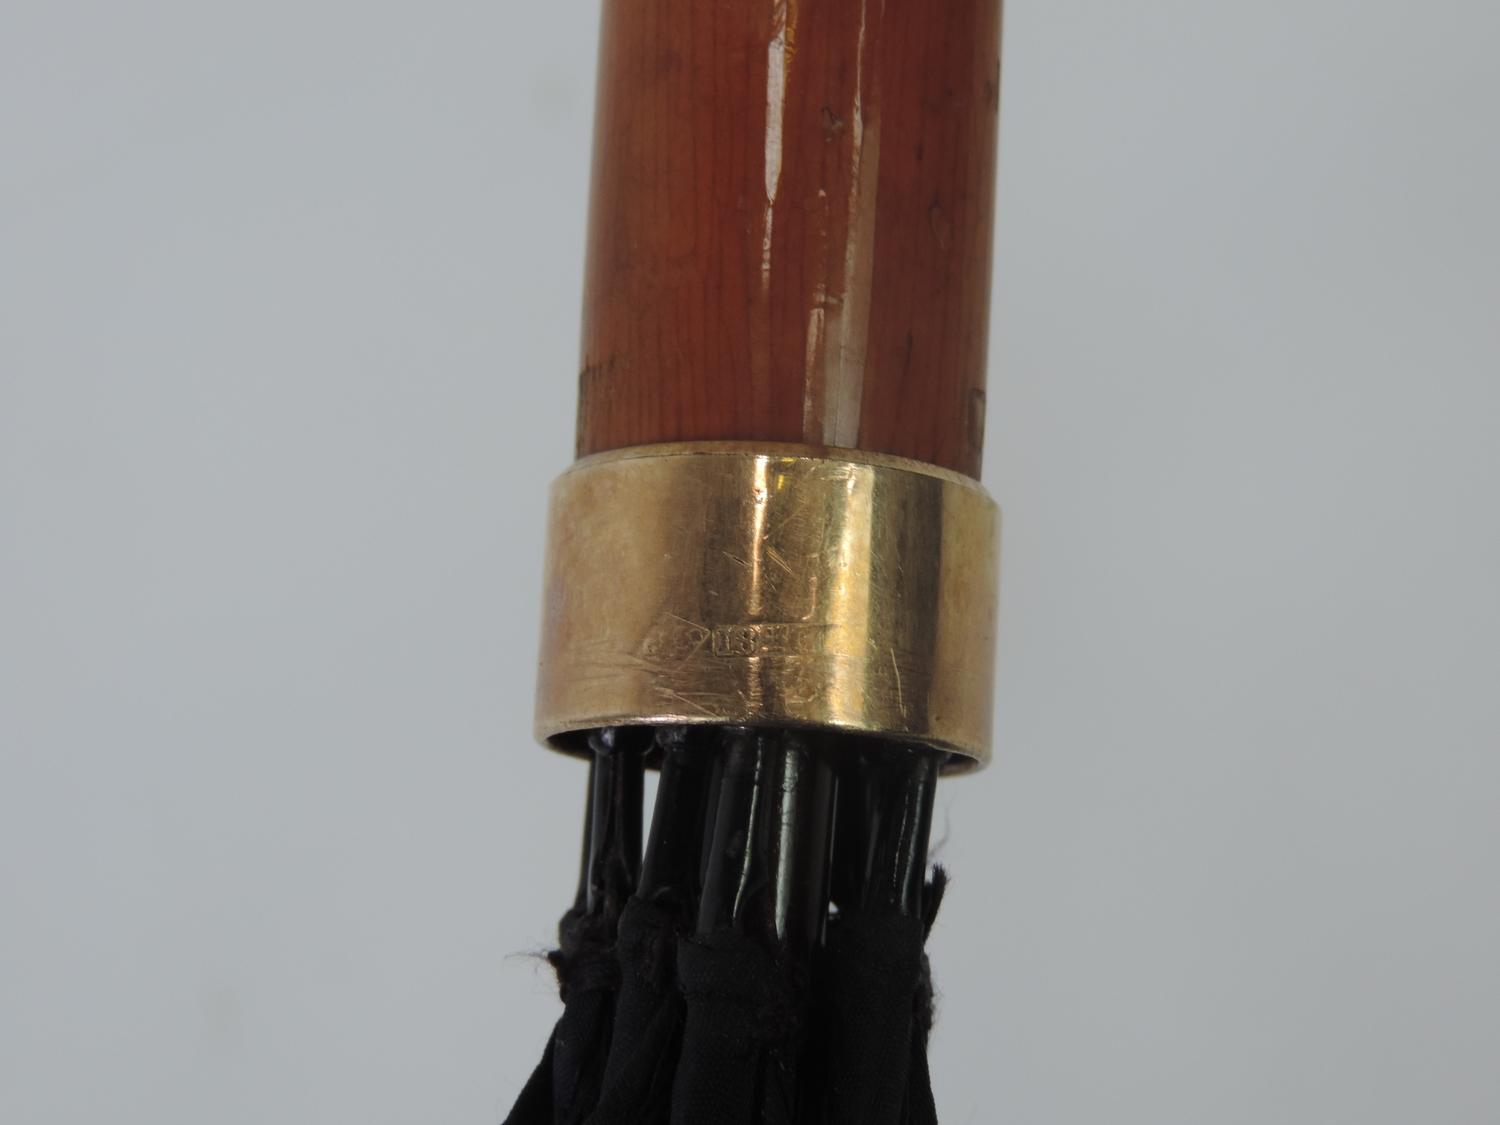 Gents Vintage Umbrella with 18ct Gold Mount - Image 4 of 4